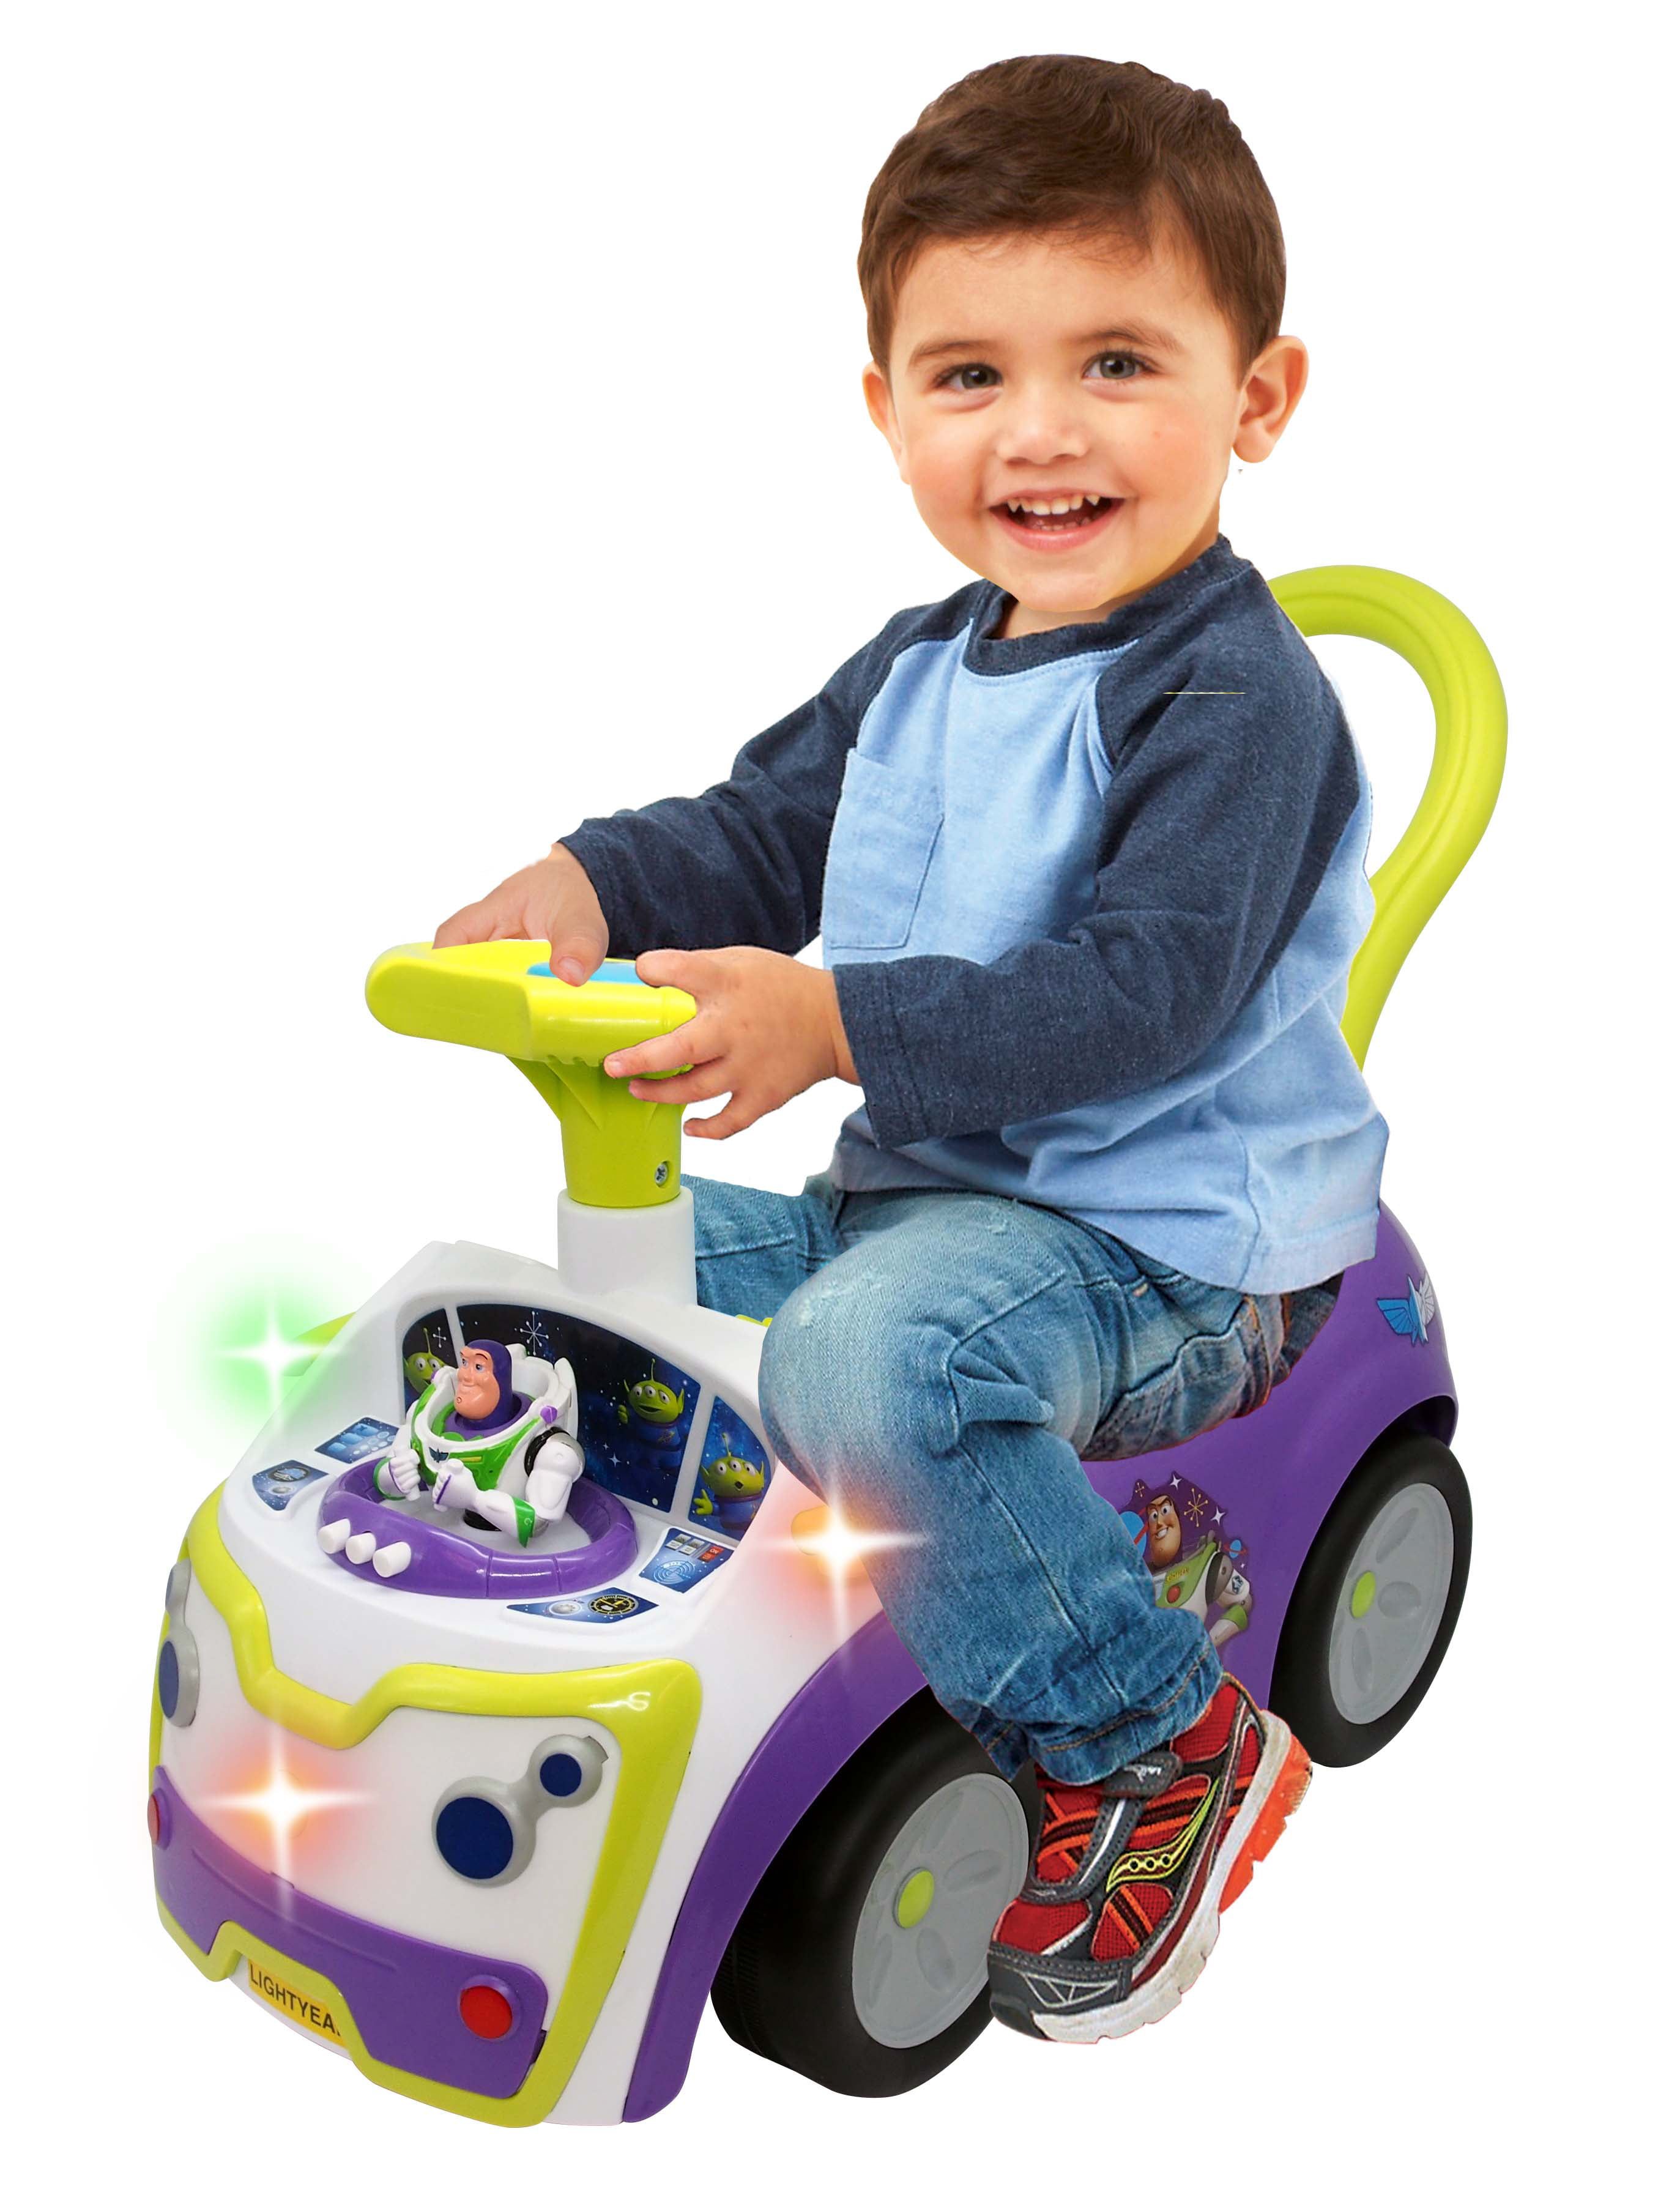 NEW Kid Trax Disney's Toy Story Buzz Lightyear FUN Toddler Easy Safe RIDE-ON 